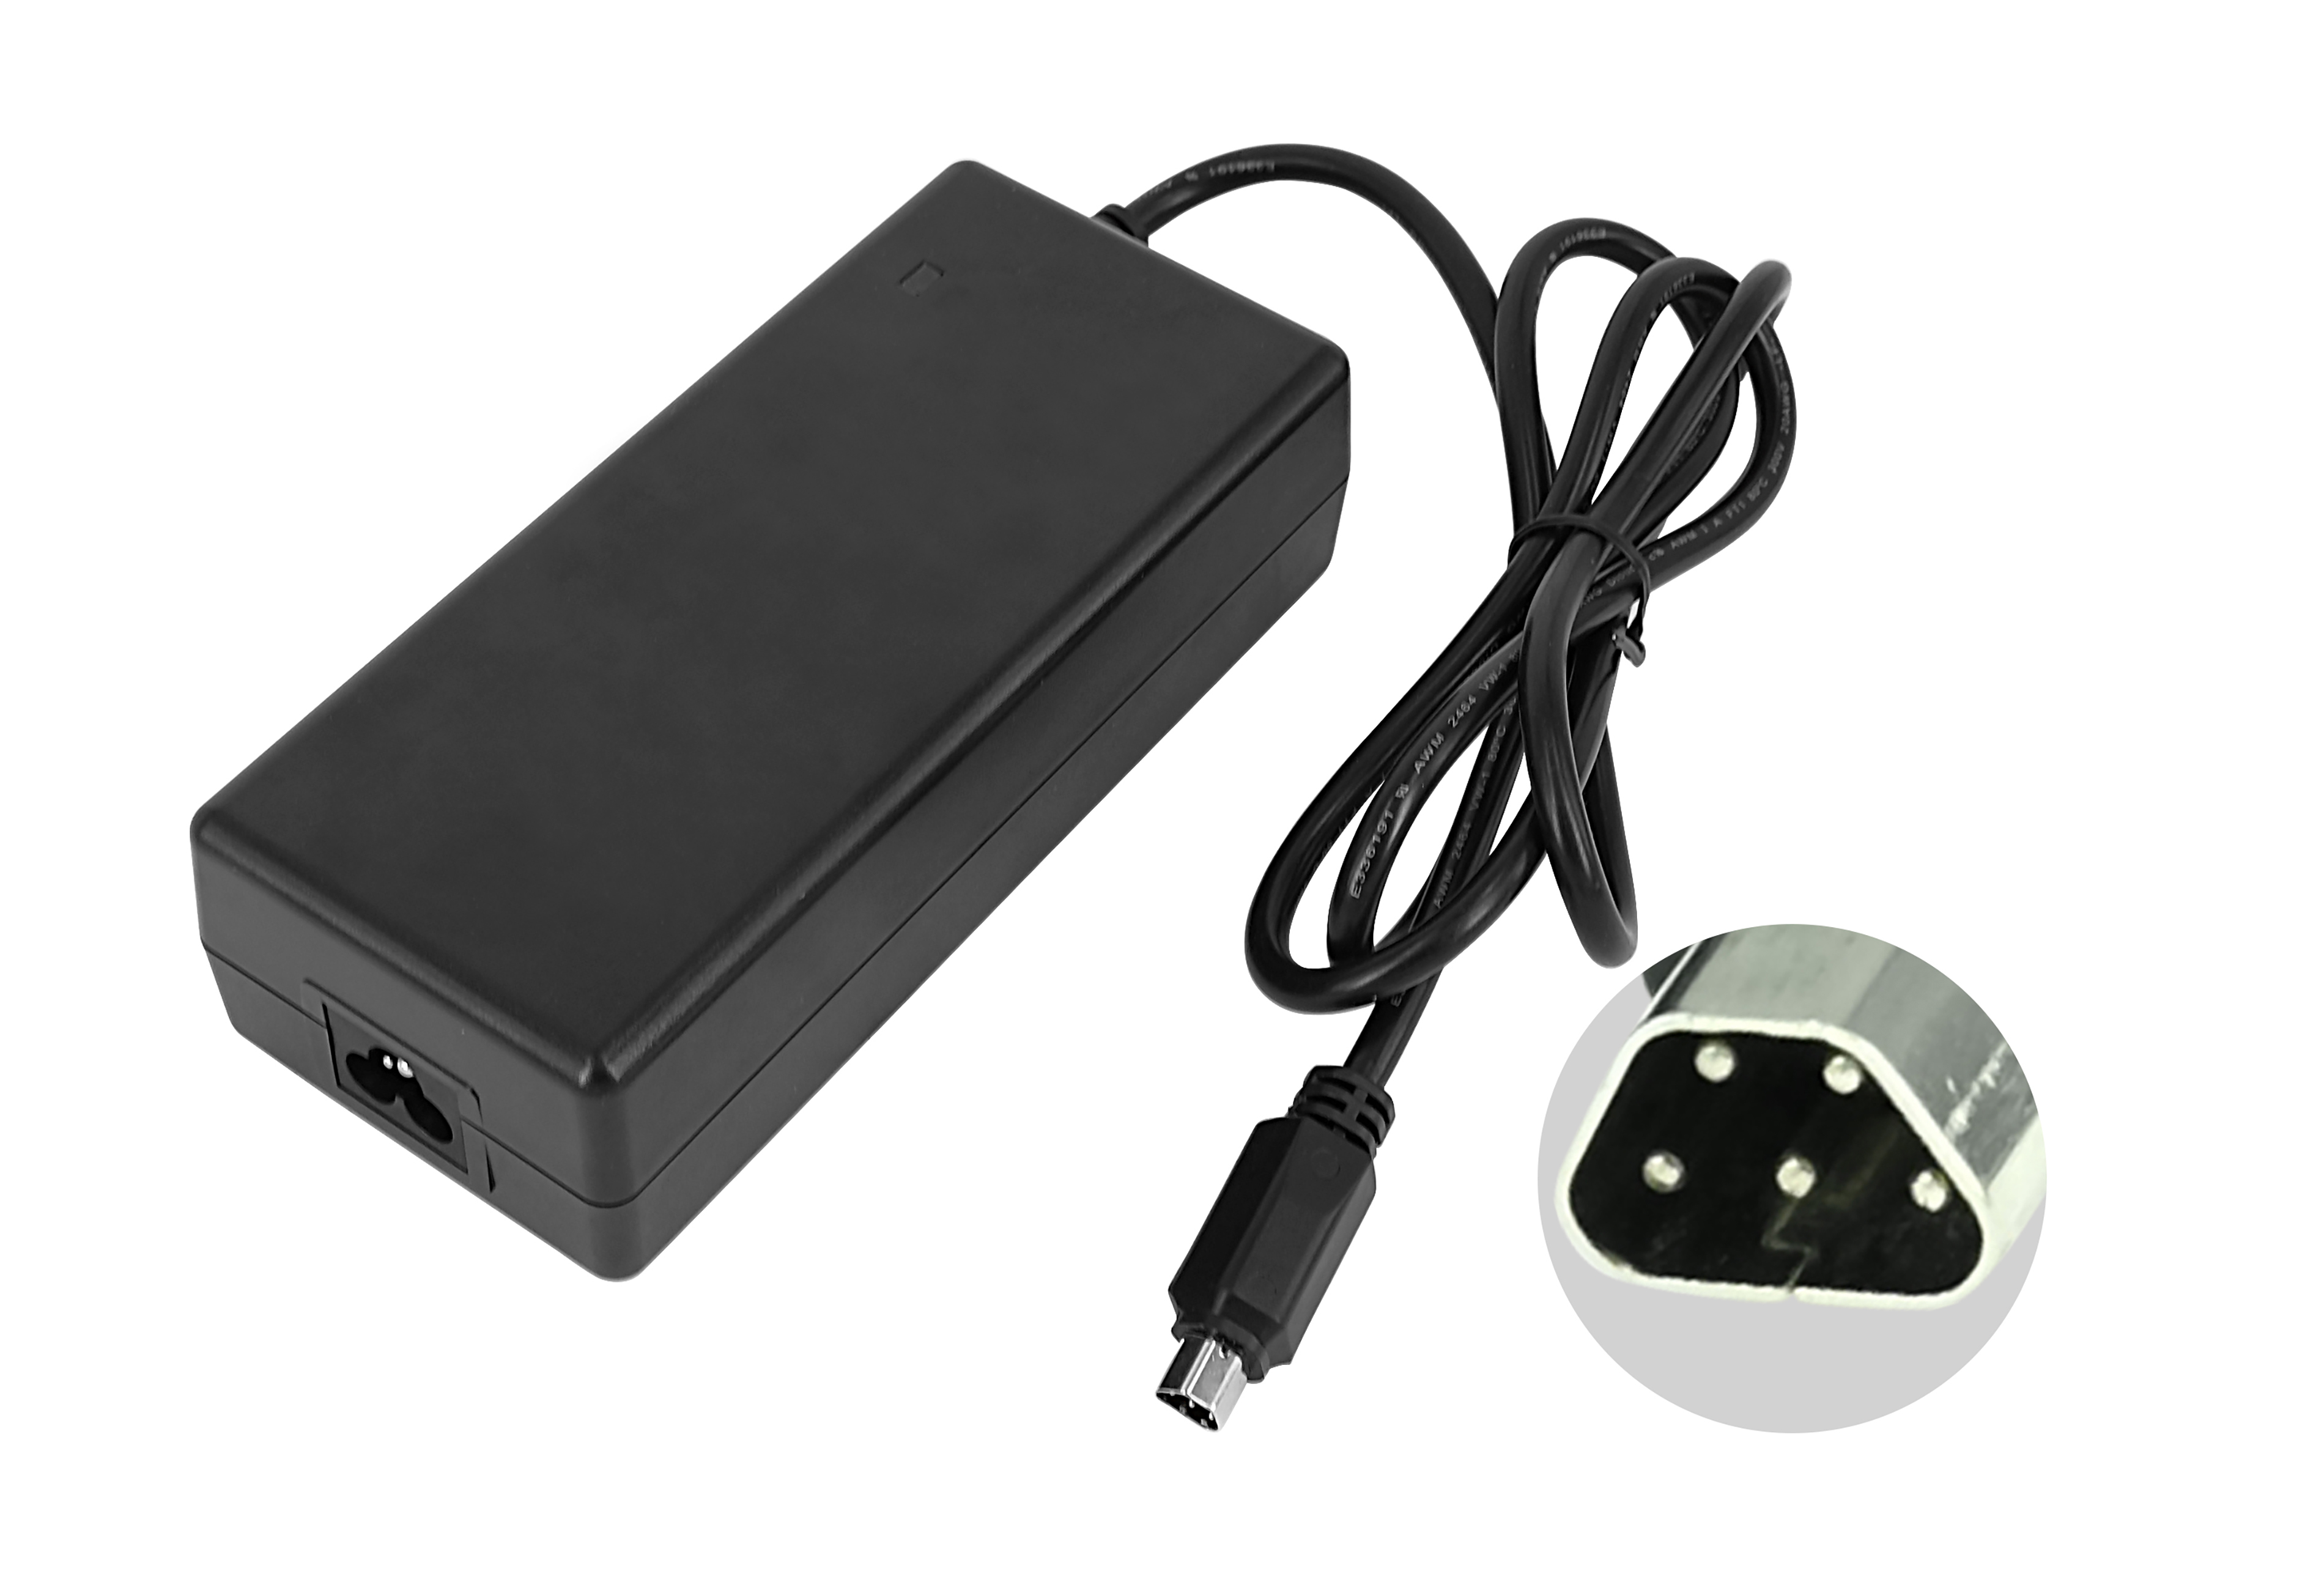 42V 2A Trapezoid 5 pin charger for e-bikes fitted with Joycube, Phylion 36V Lithium Batteries